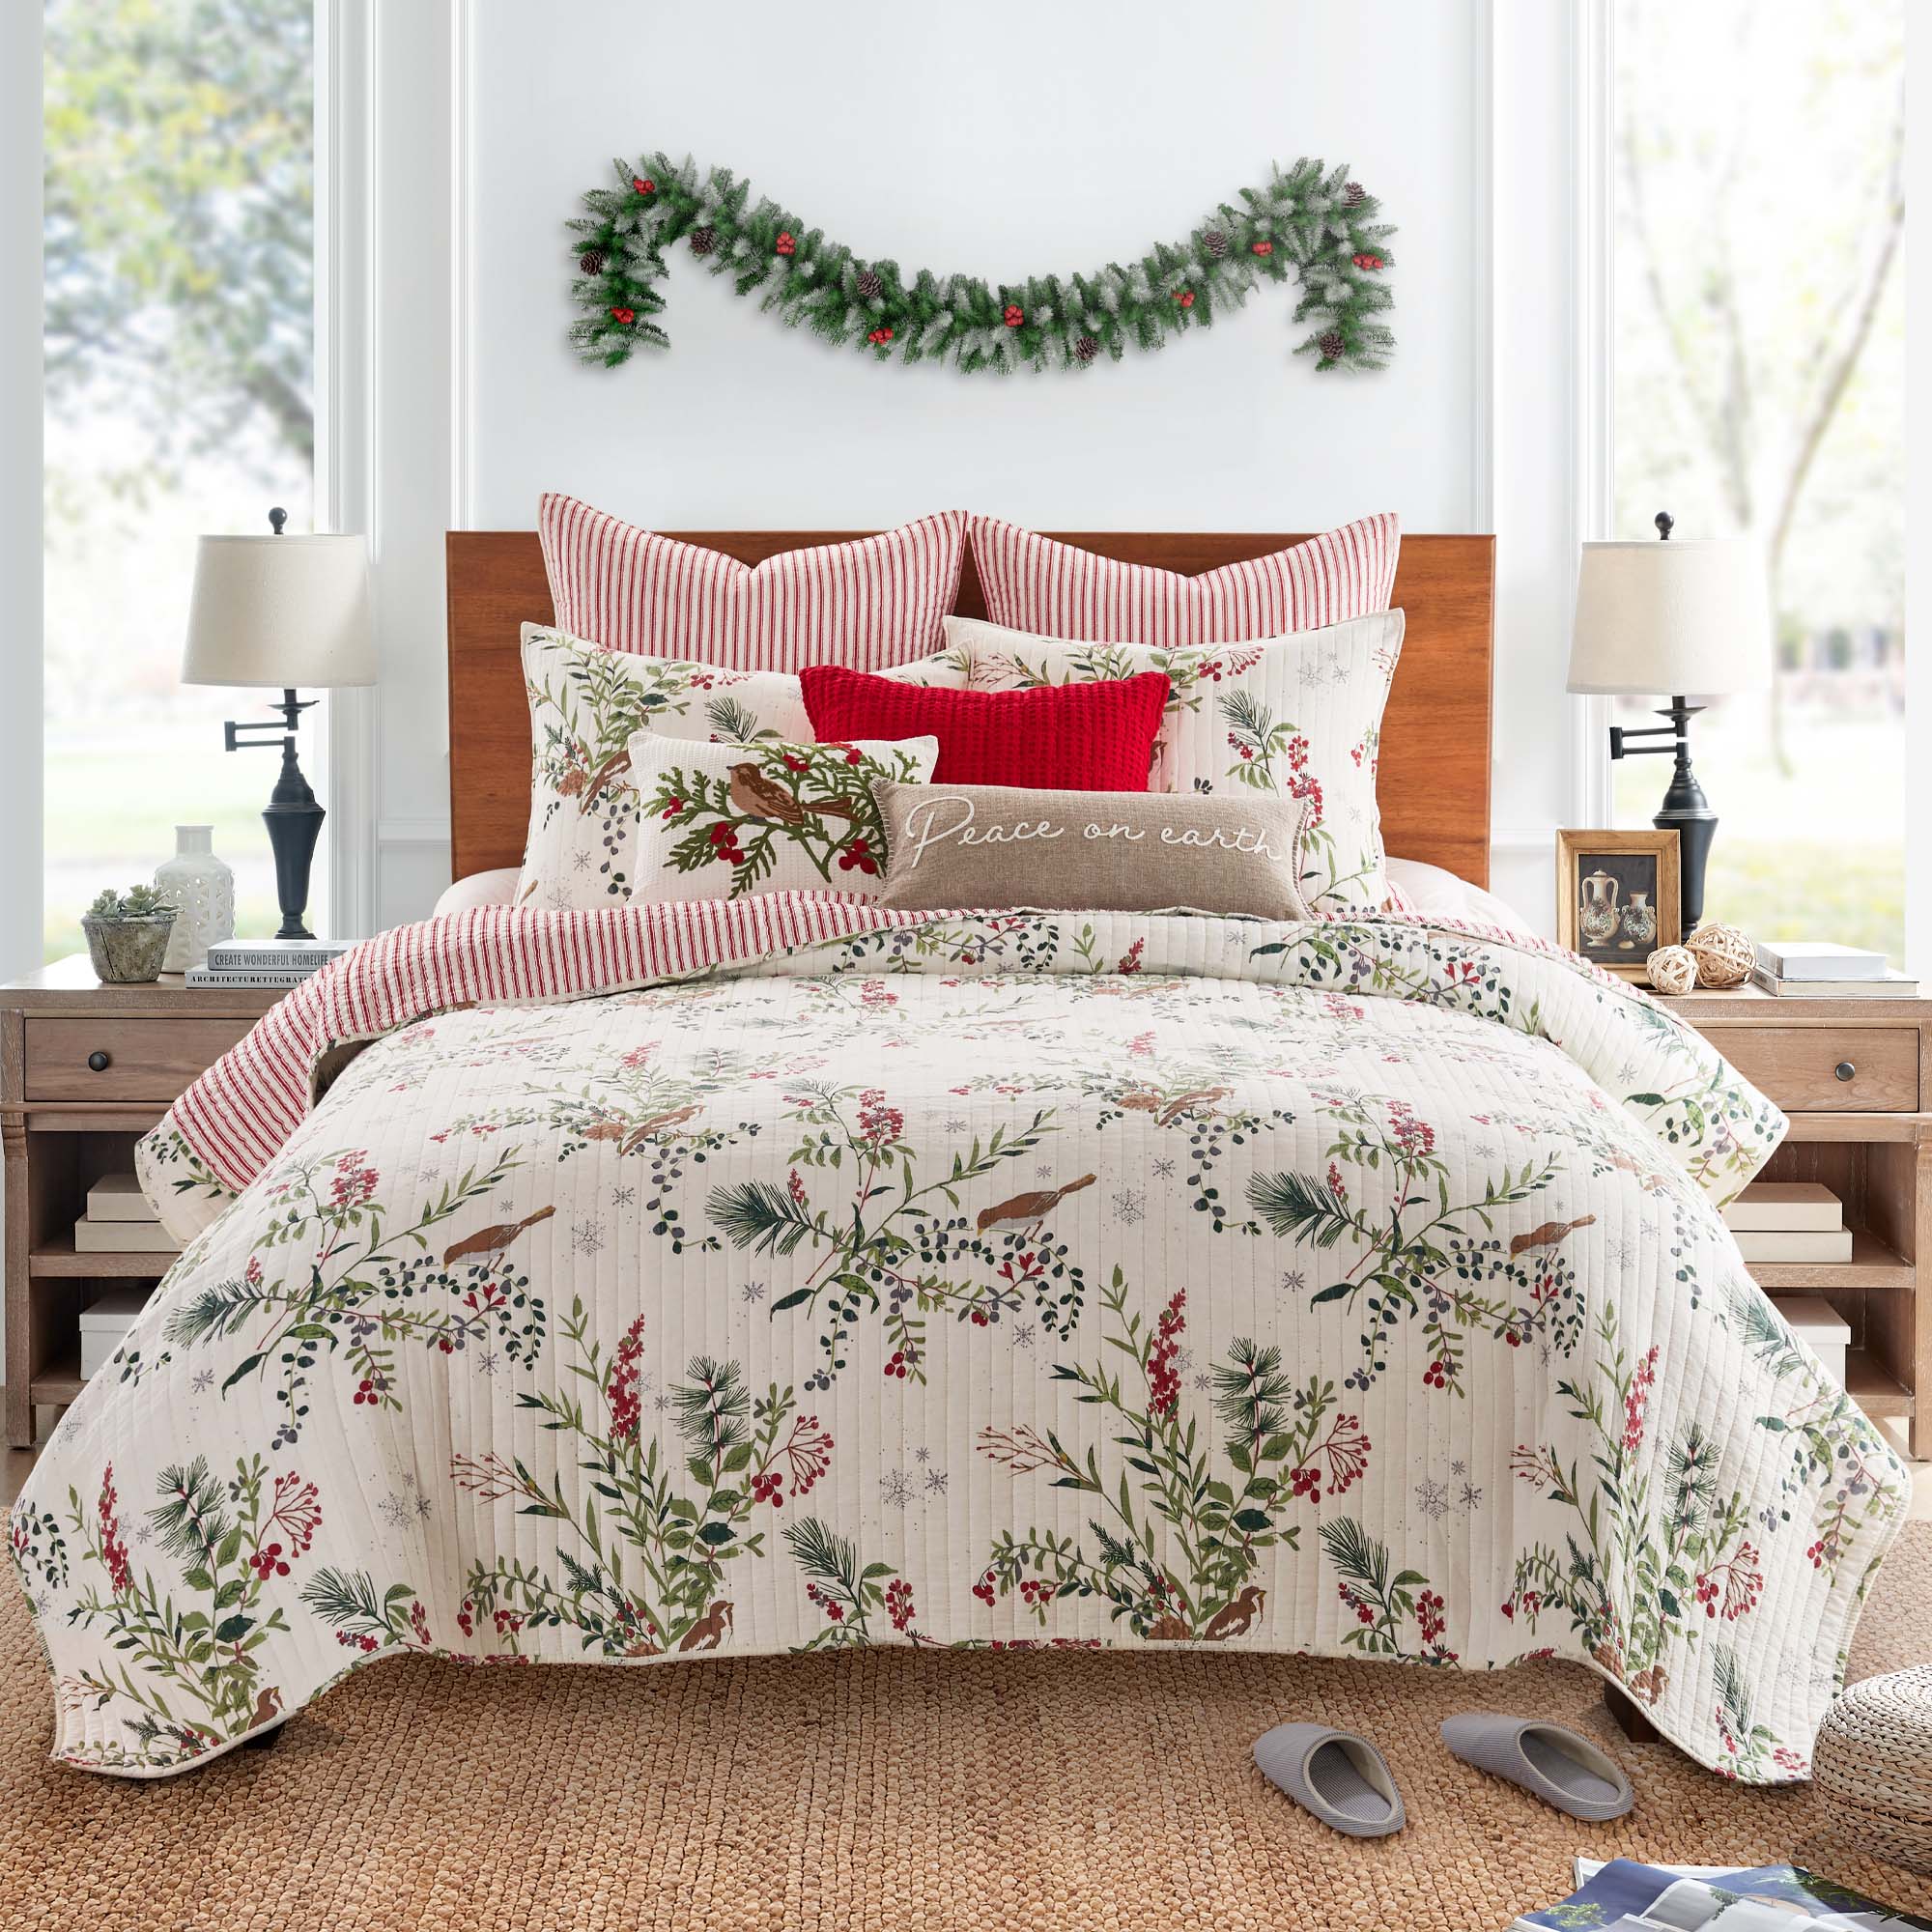 Winterberry Forest Peace on Earth Pillow